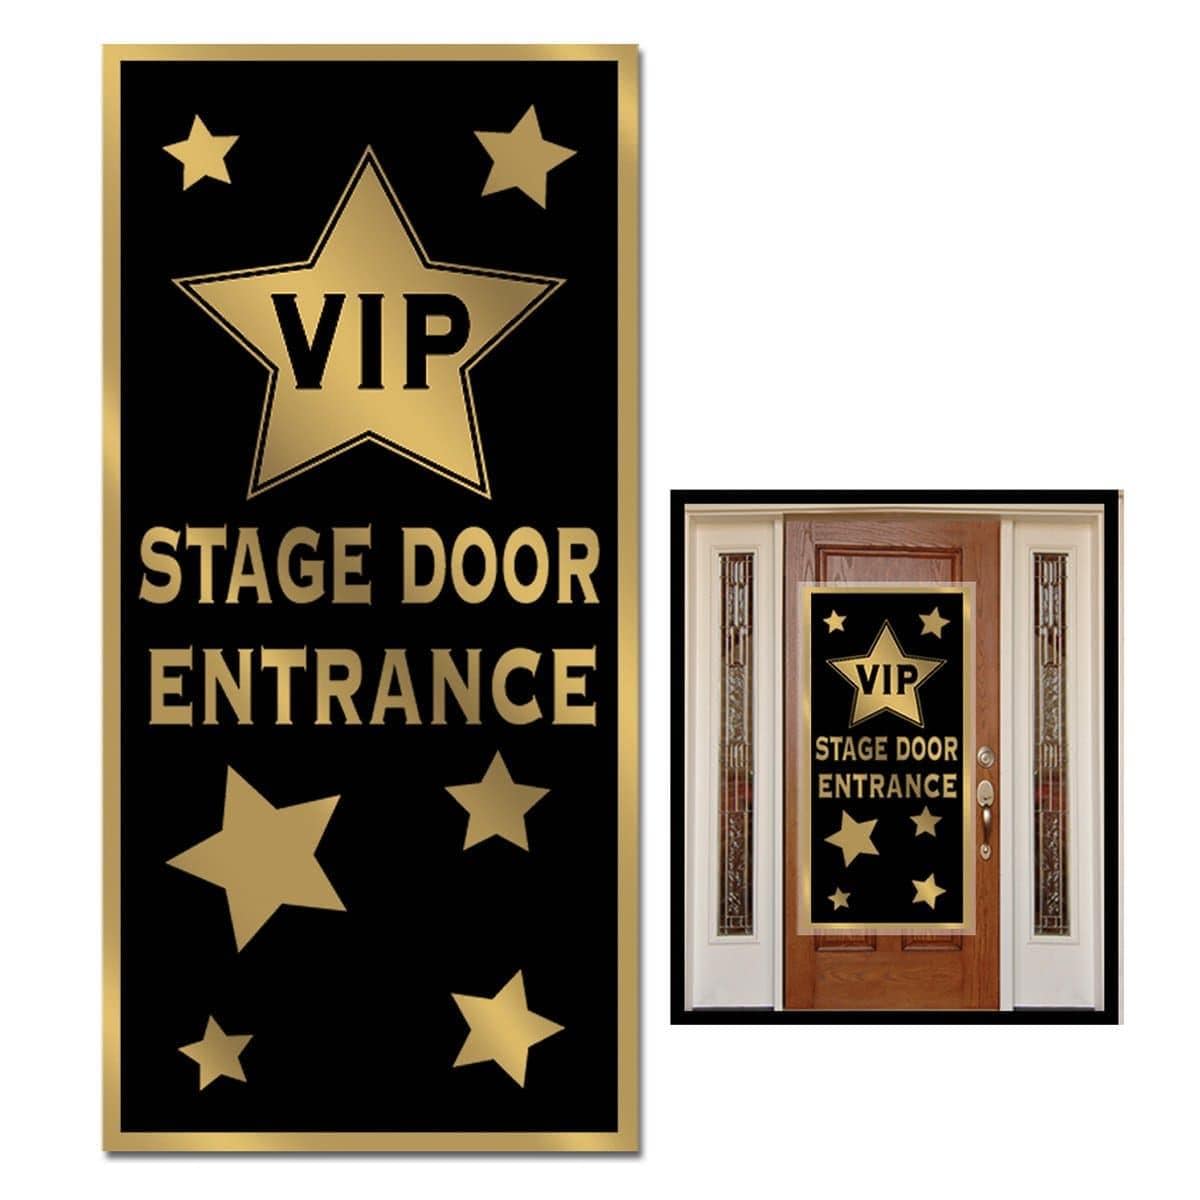 Buy Theme Party VIP Stage Entrance Door Decoration sold at Party Expert